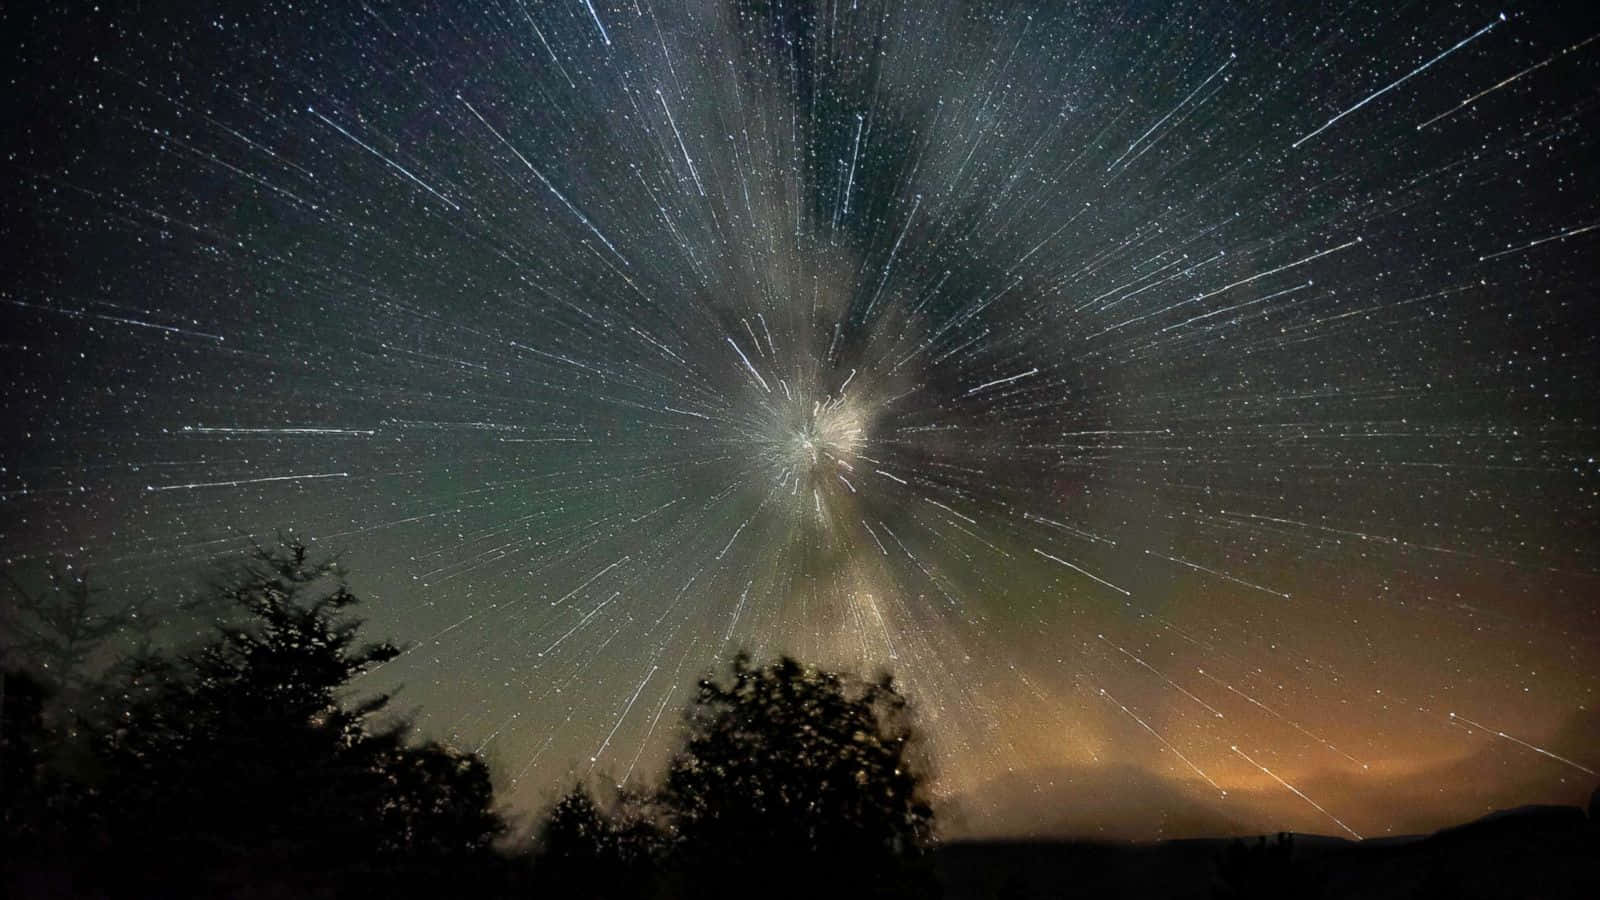 A glowing meteor travelling through the night sky